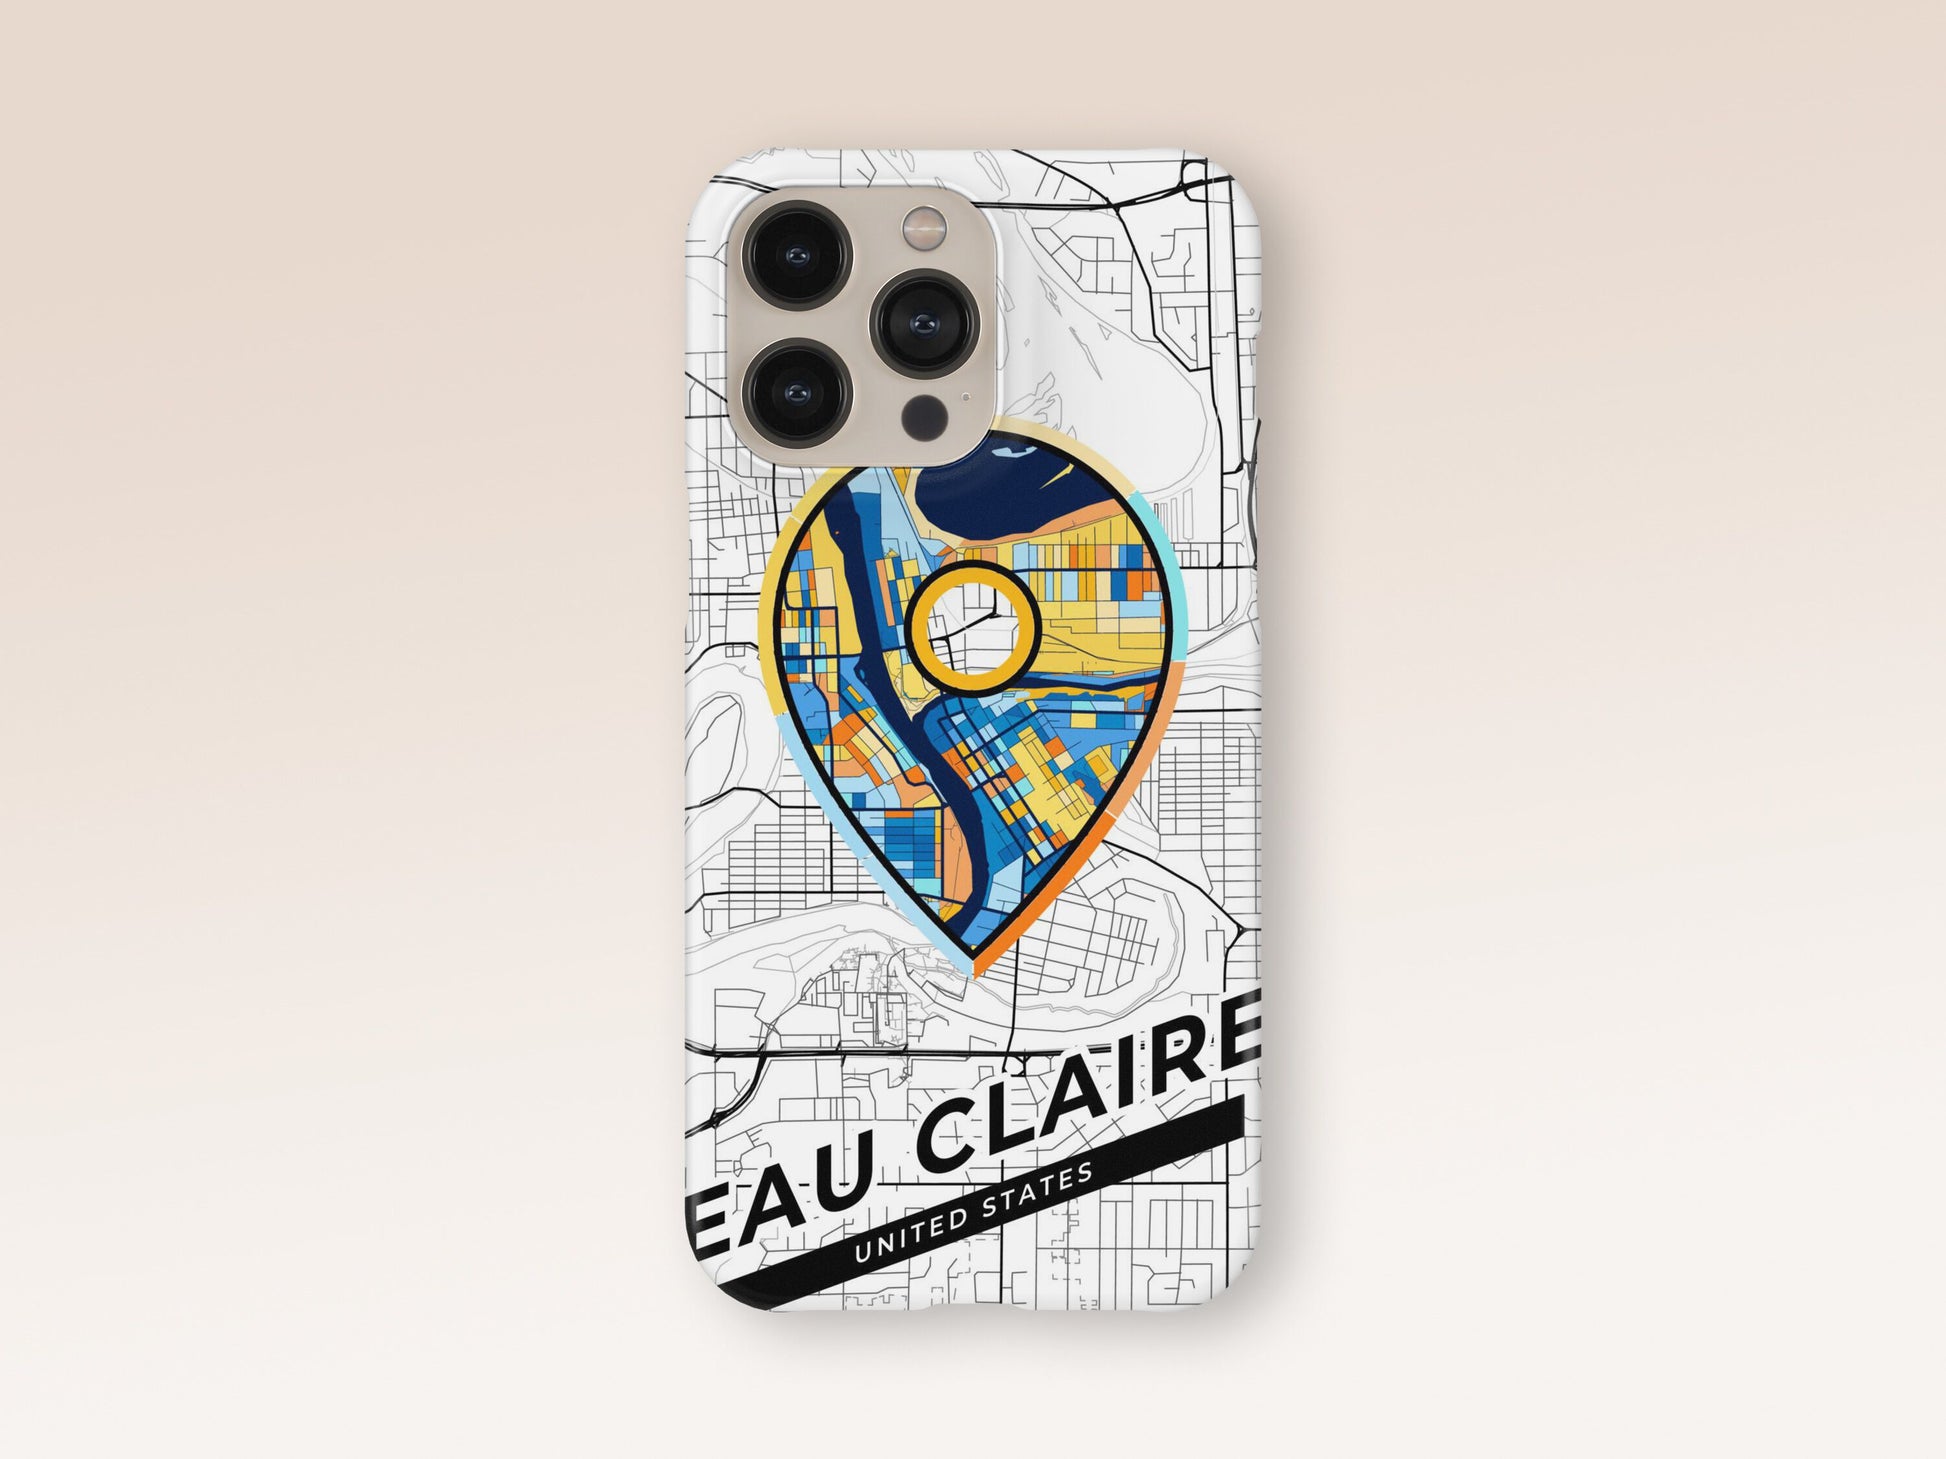 Eau Claire Wisconsin slim phone case with colorful icon. Birthday, wedding or housewarming gift. Couple match cases. 1